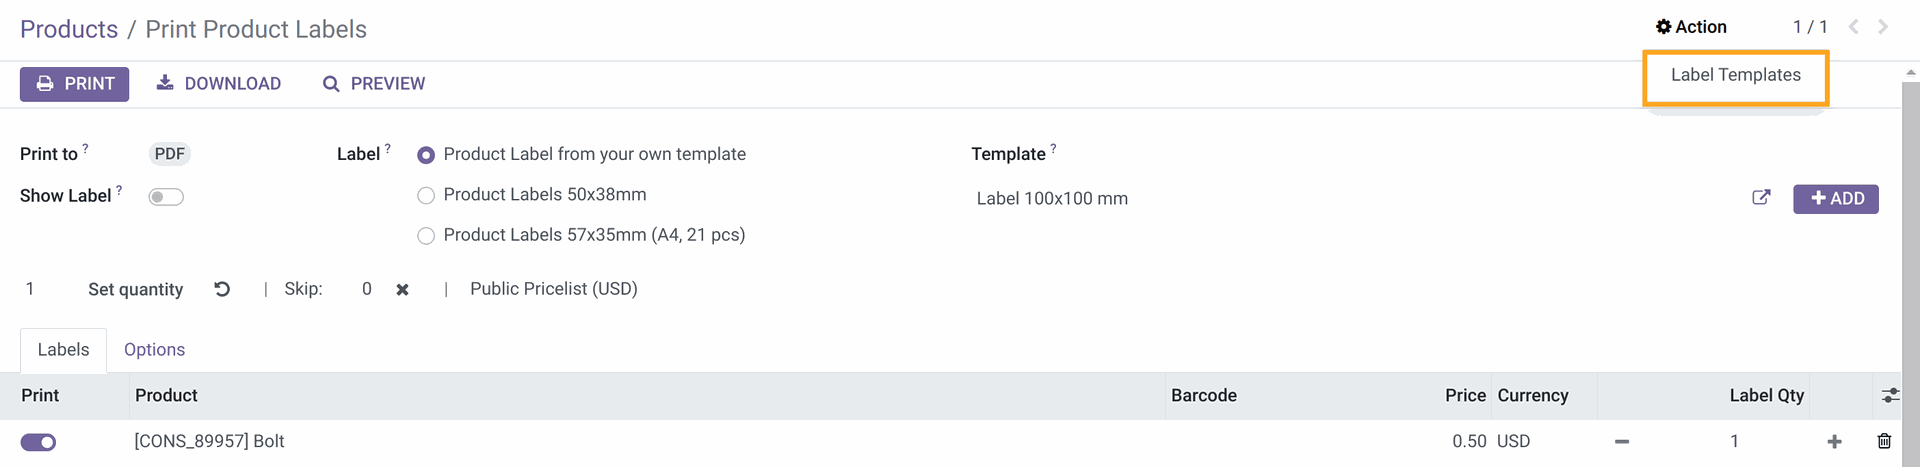 odoo product label action label templates